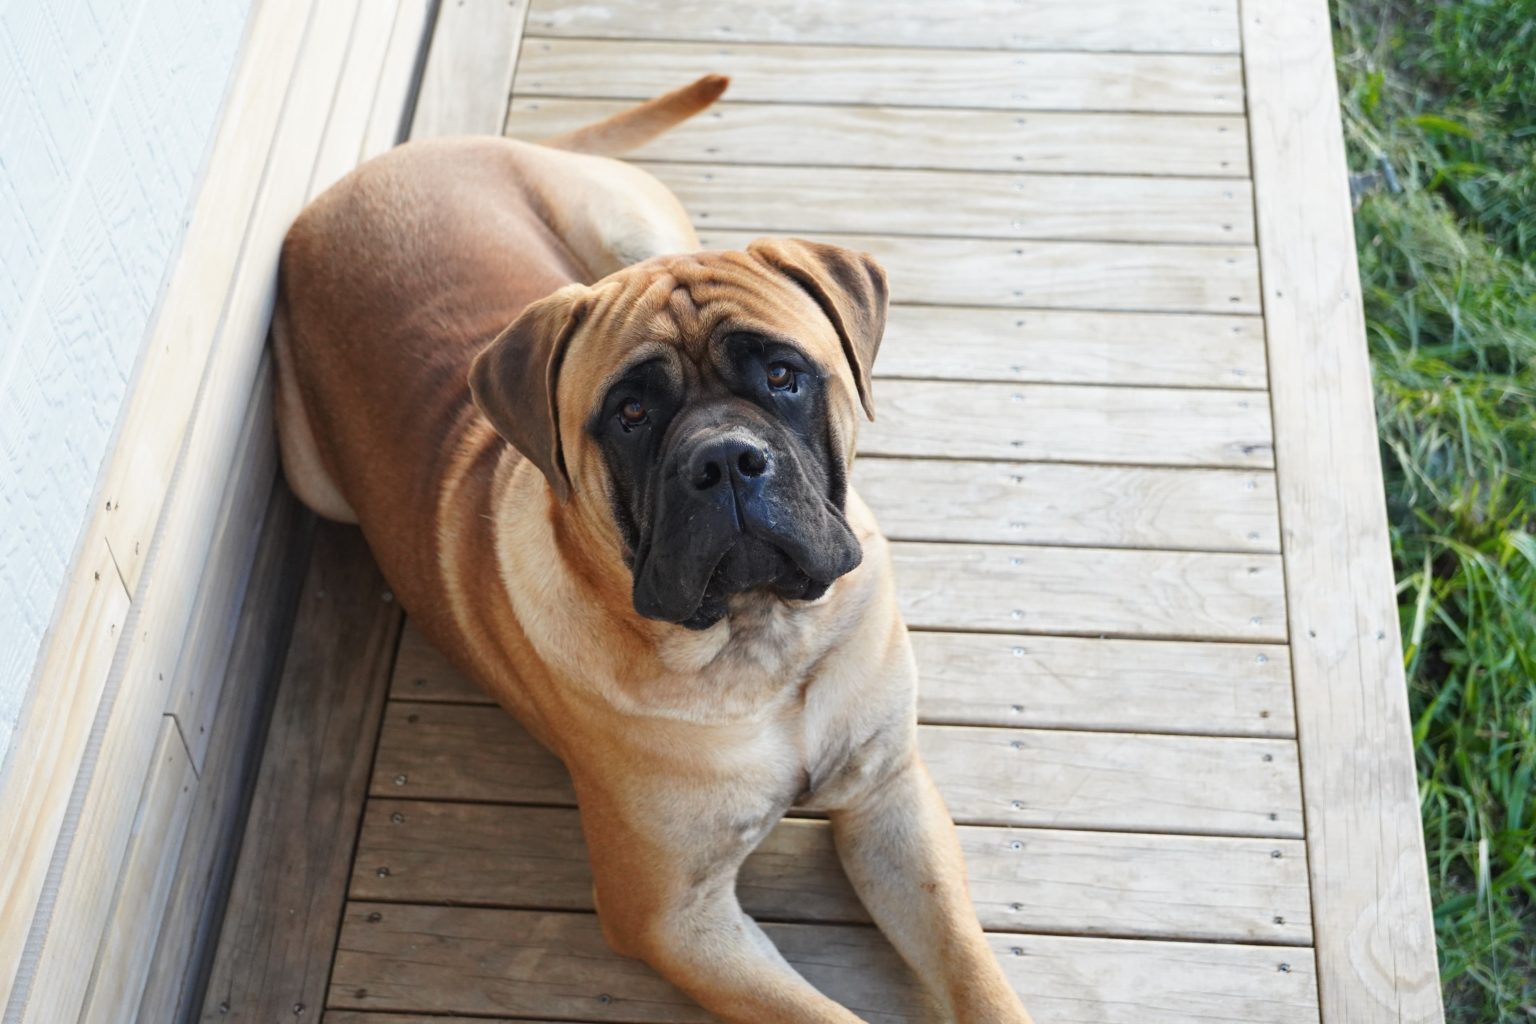 The Bullmastiff breed was developed in England during the mid-1800s. Gamekeepers needed a dog to protect their game from poachers, so they experimented with cross-breeding.